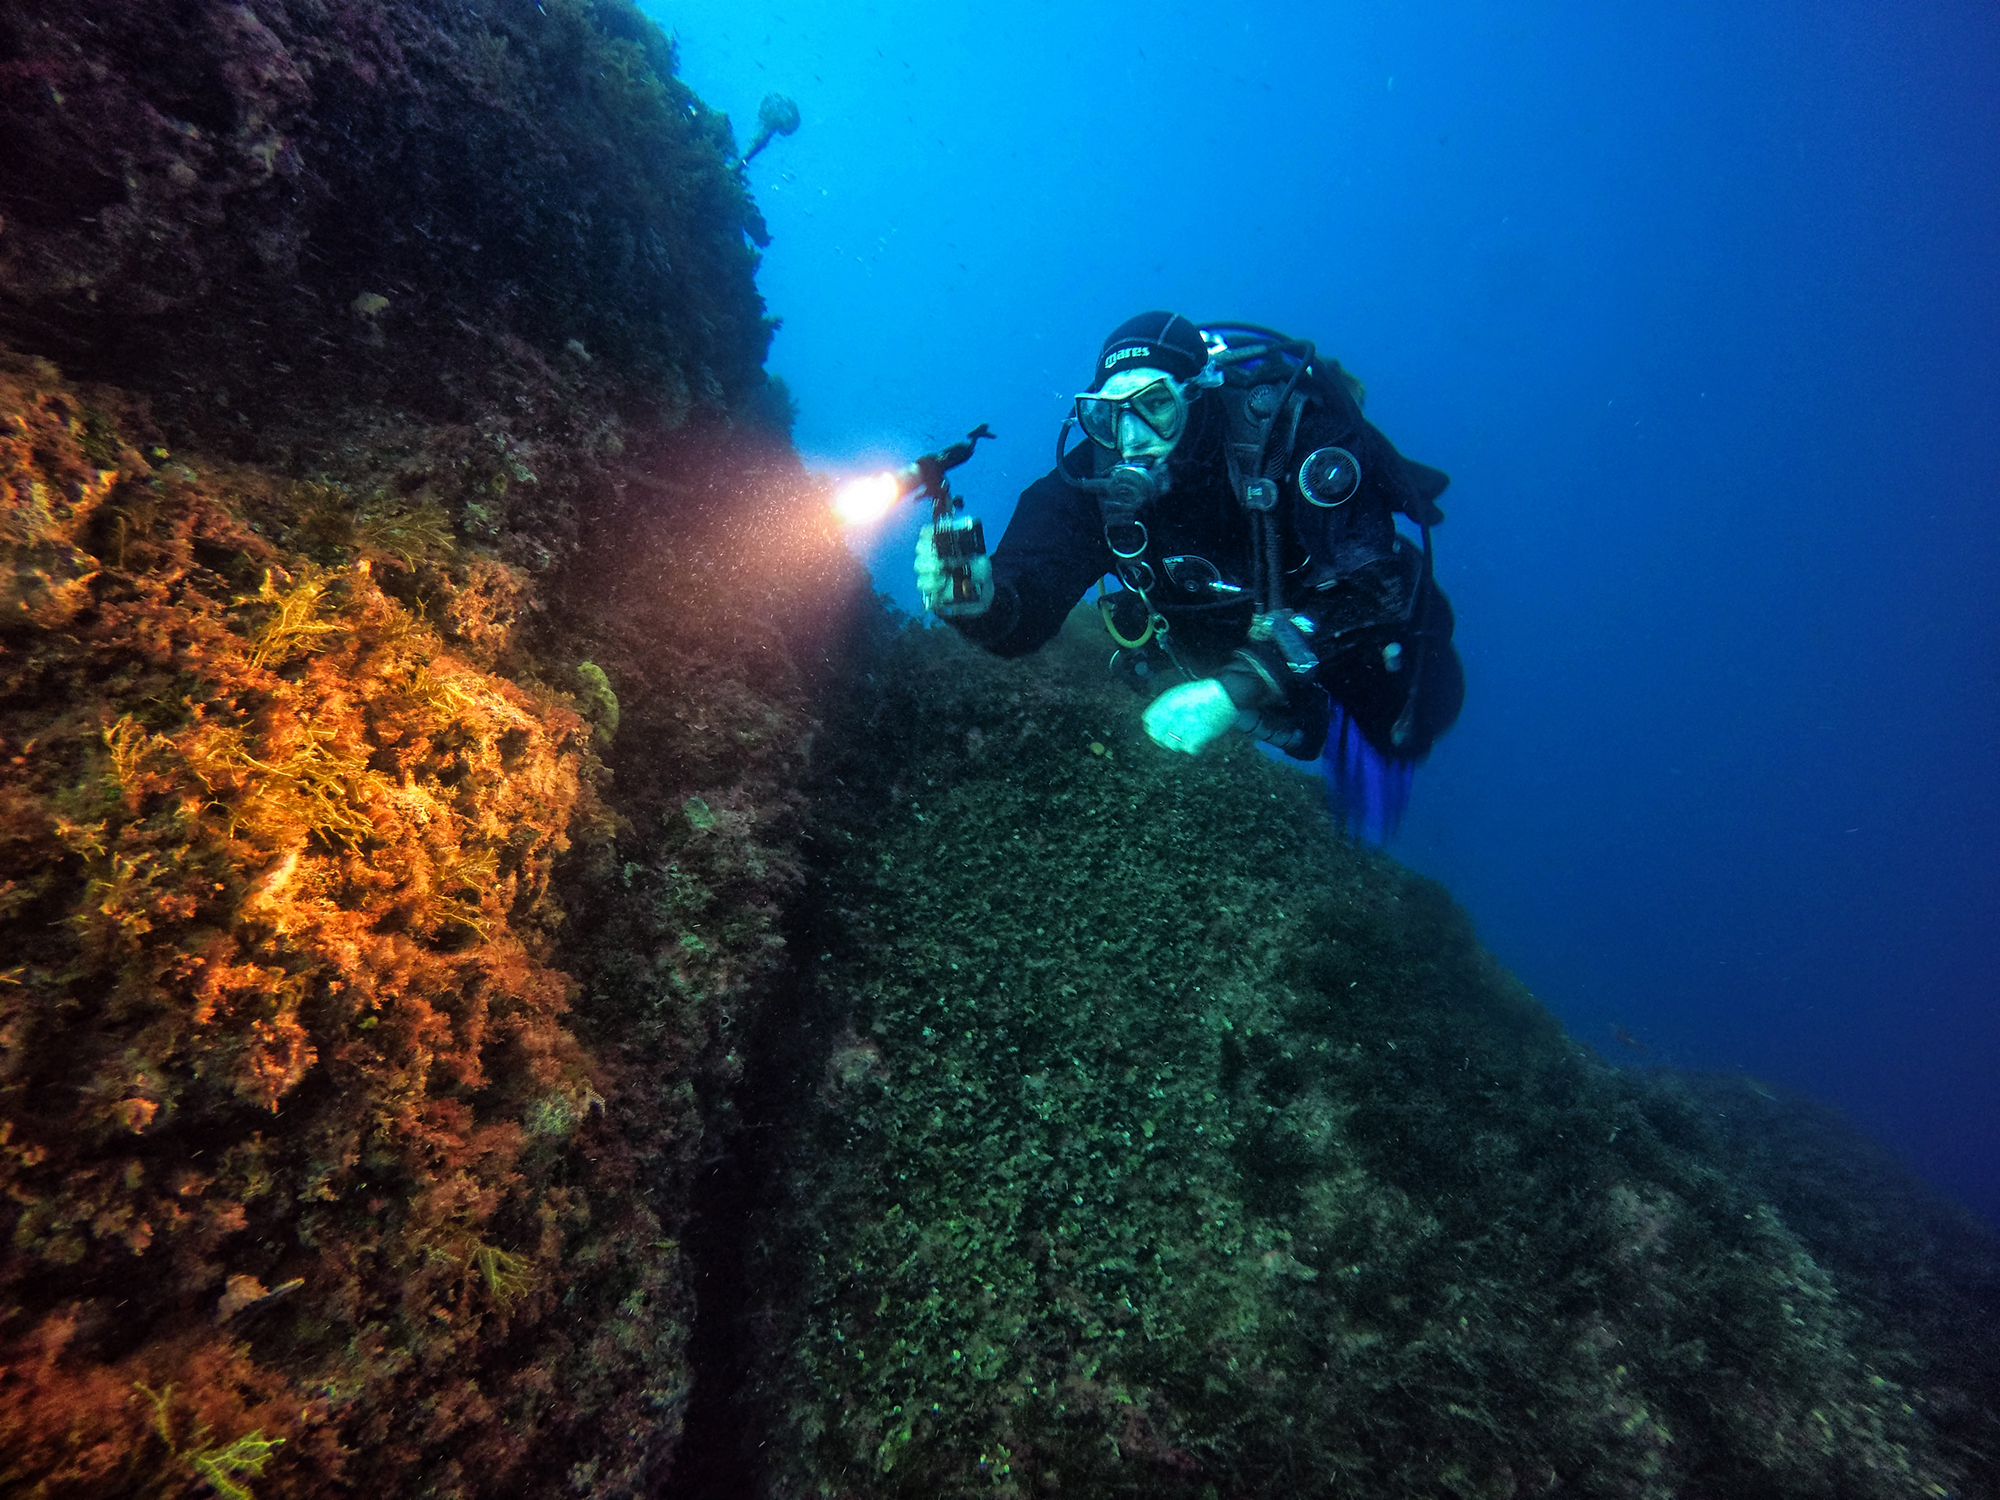 The rocks in this picture appear mostly blue-green, but where the diver’s light shines we can see the true colours emerging.